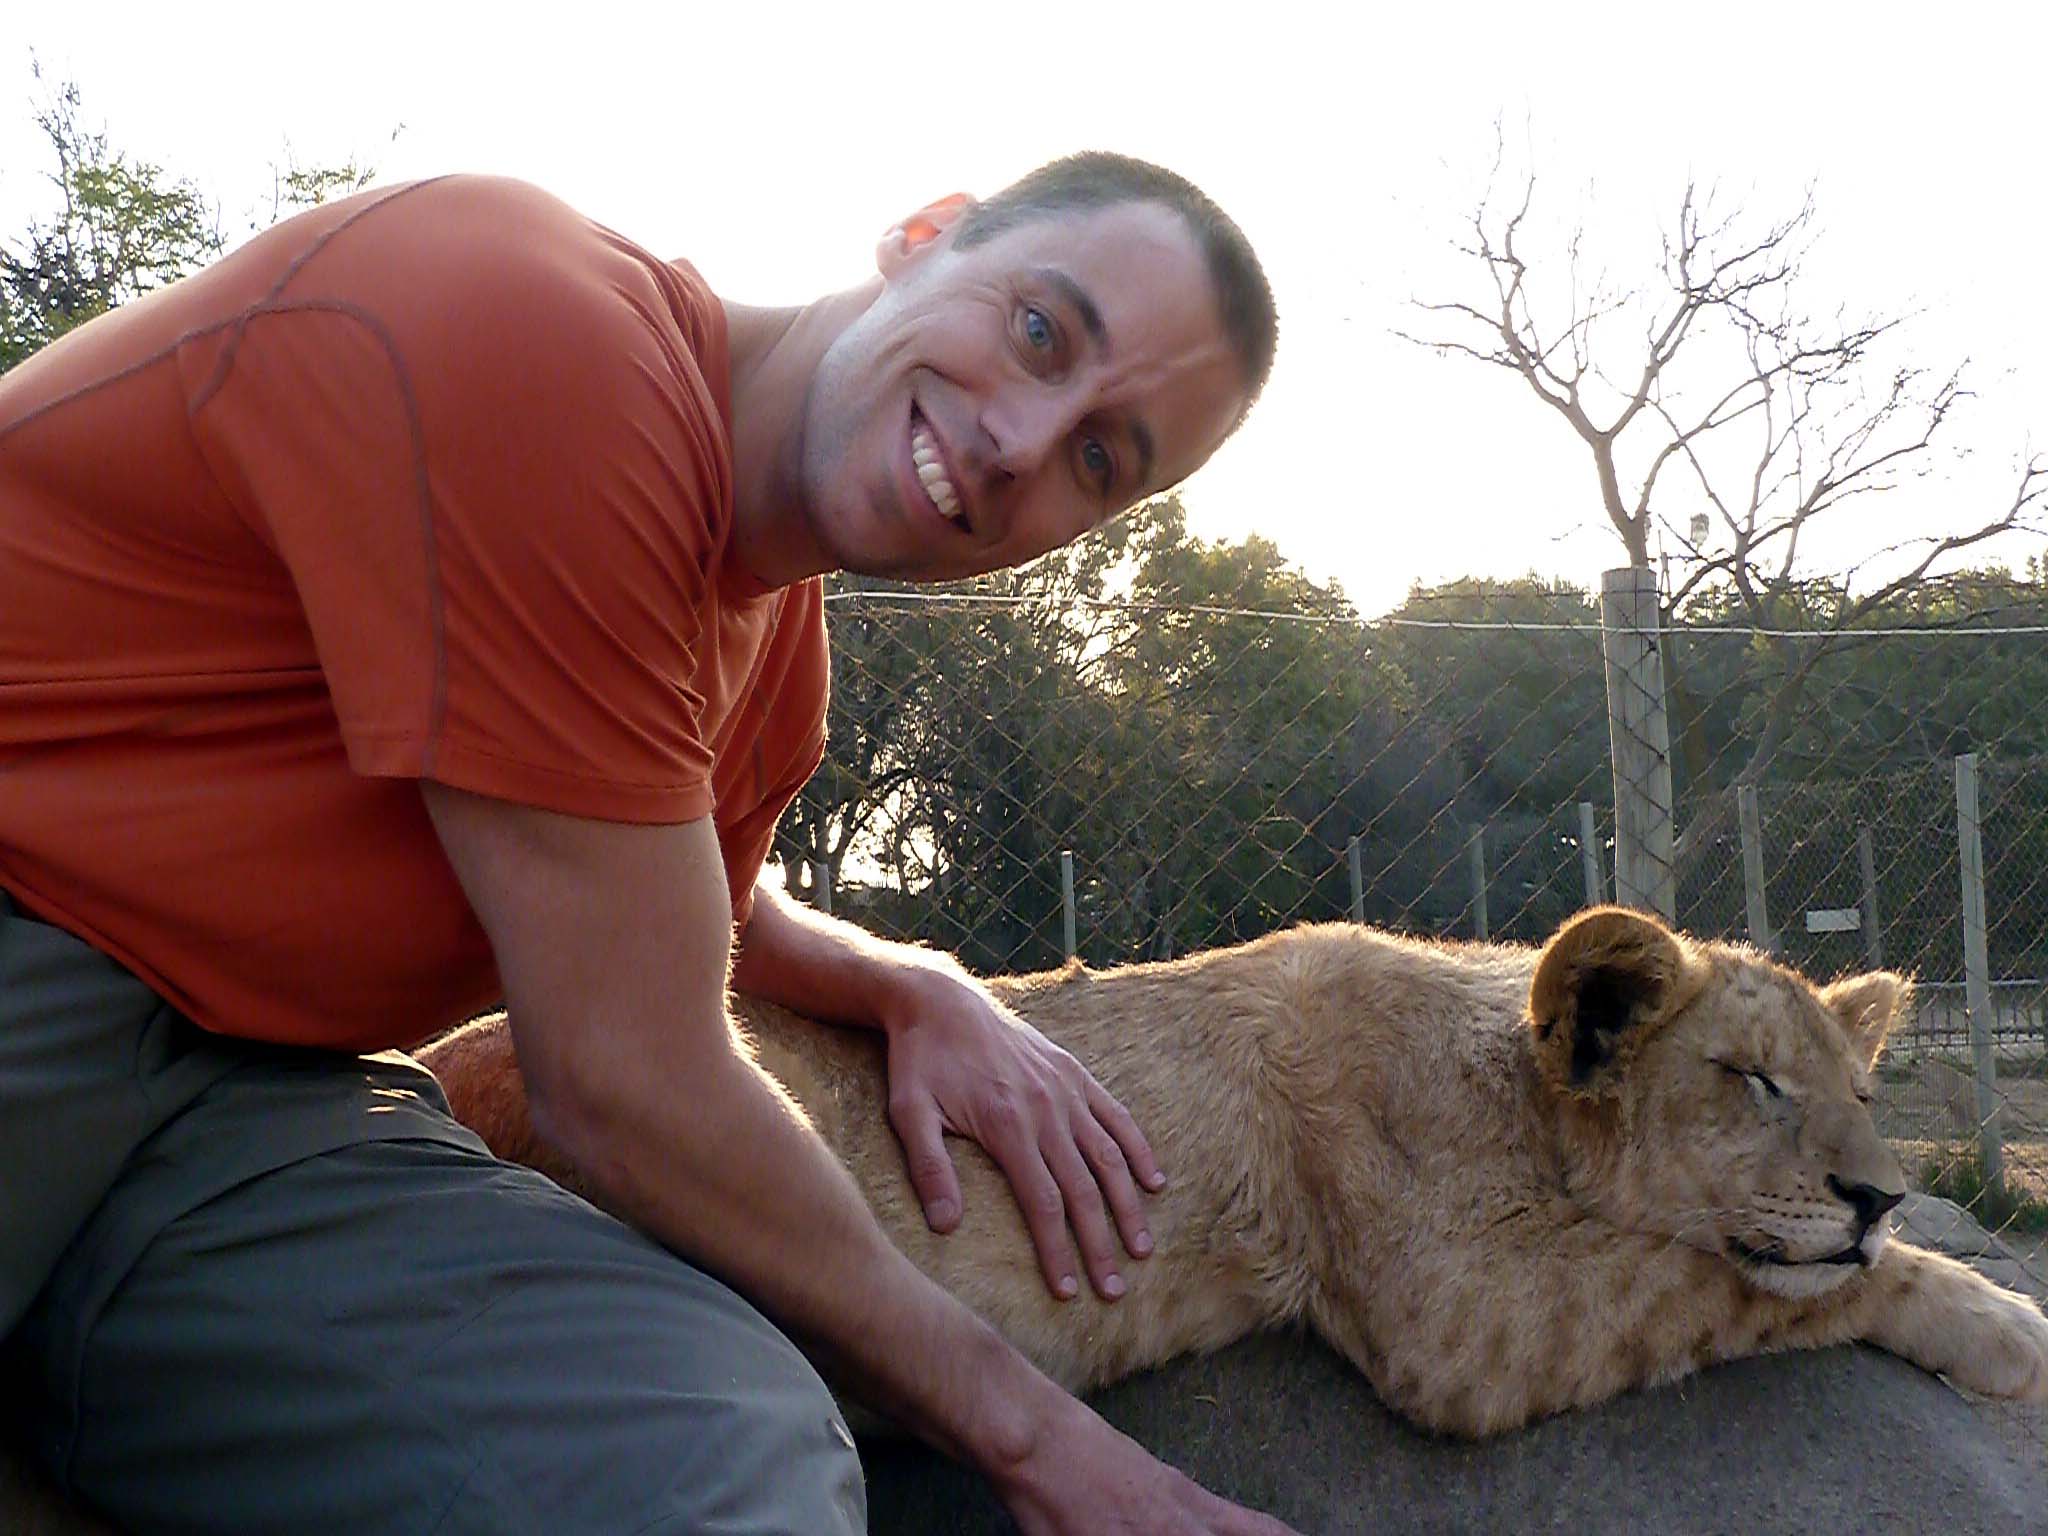 South Africa - Lion Photo Op